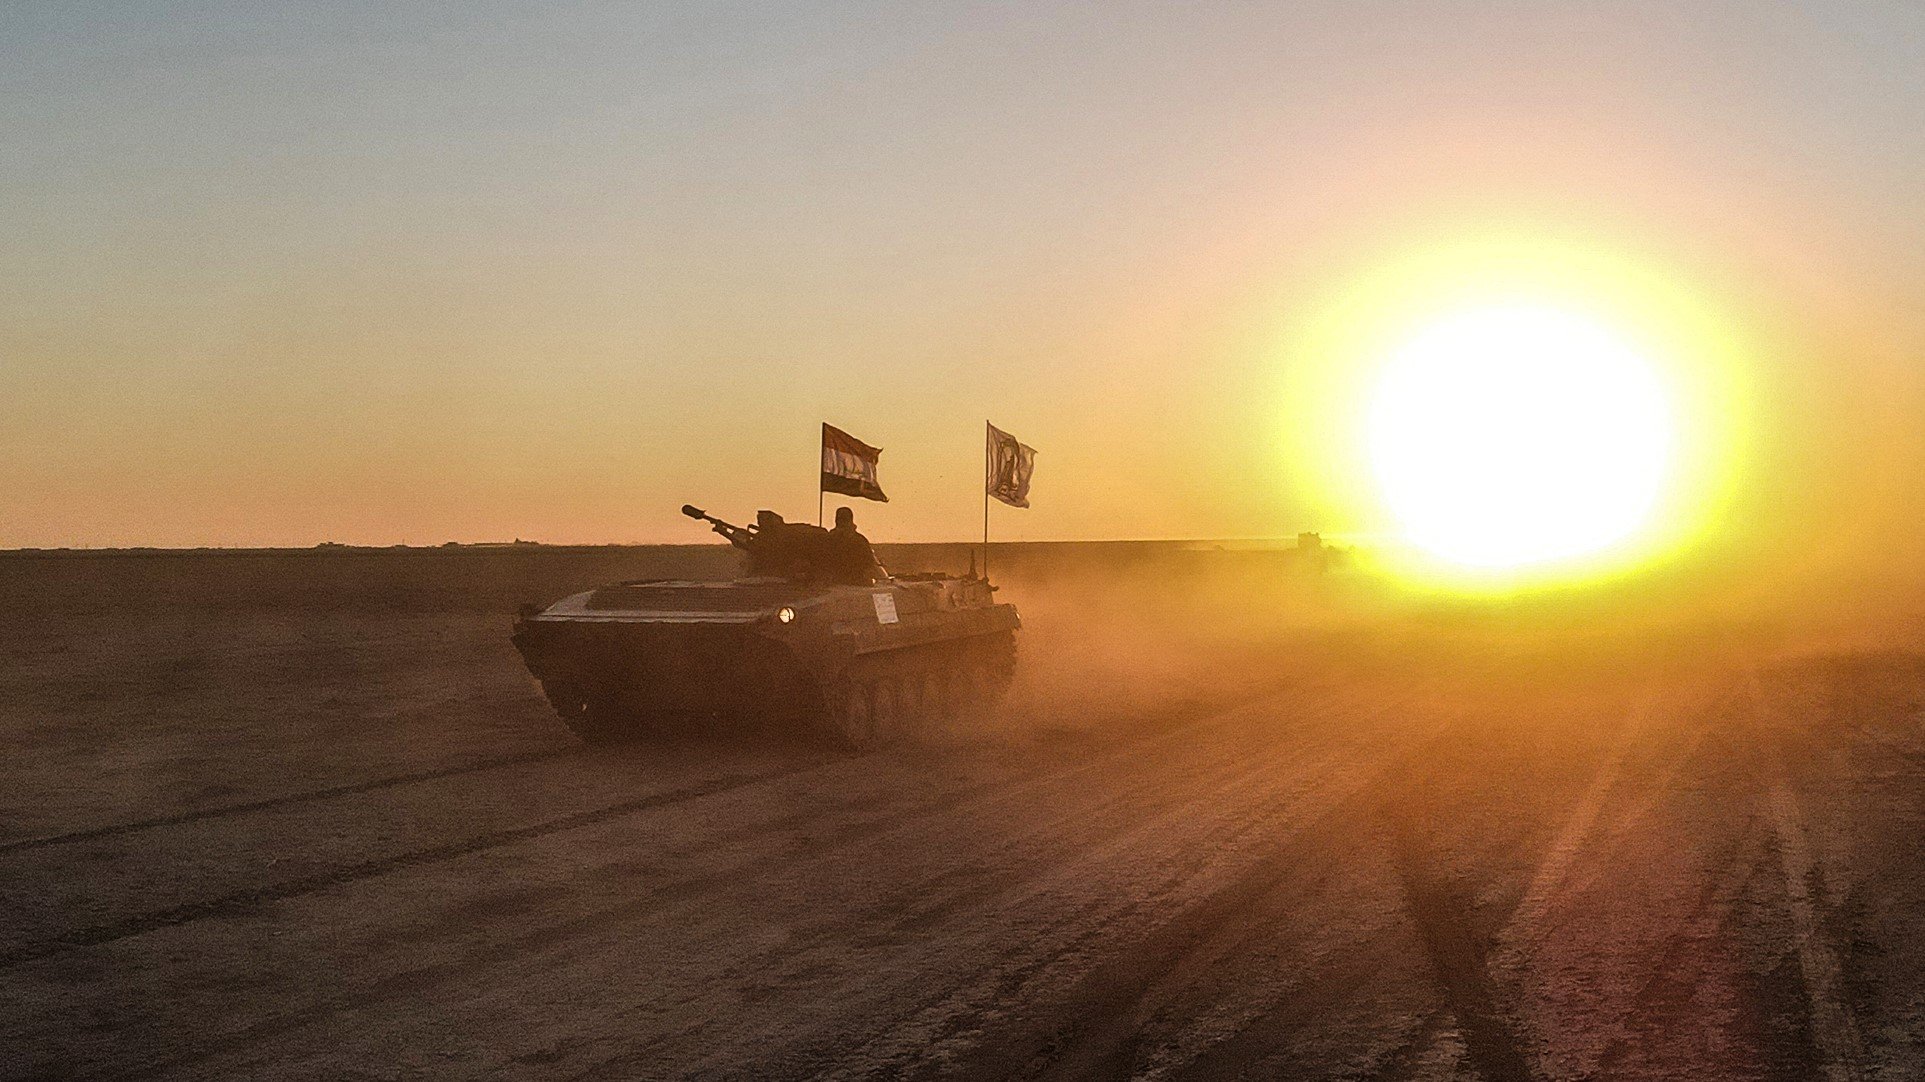 Iraq says its spending big on artillery and jets. Can it afford them?